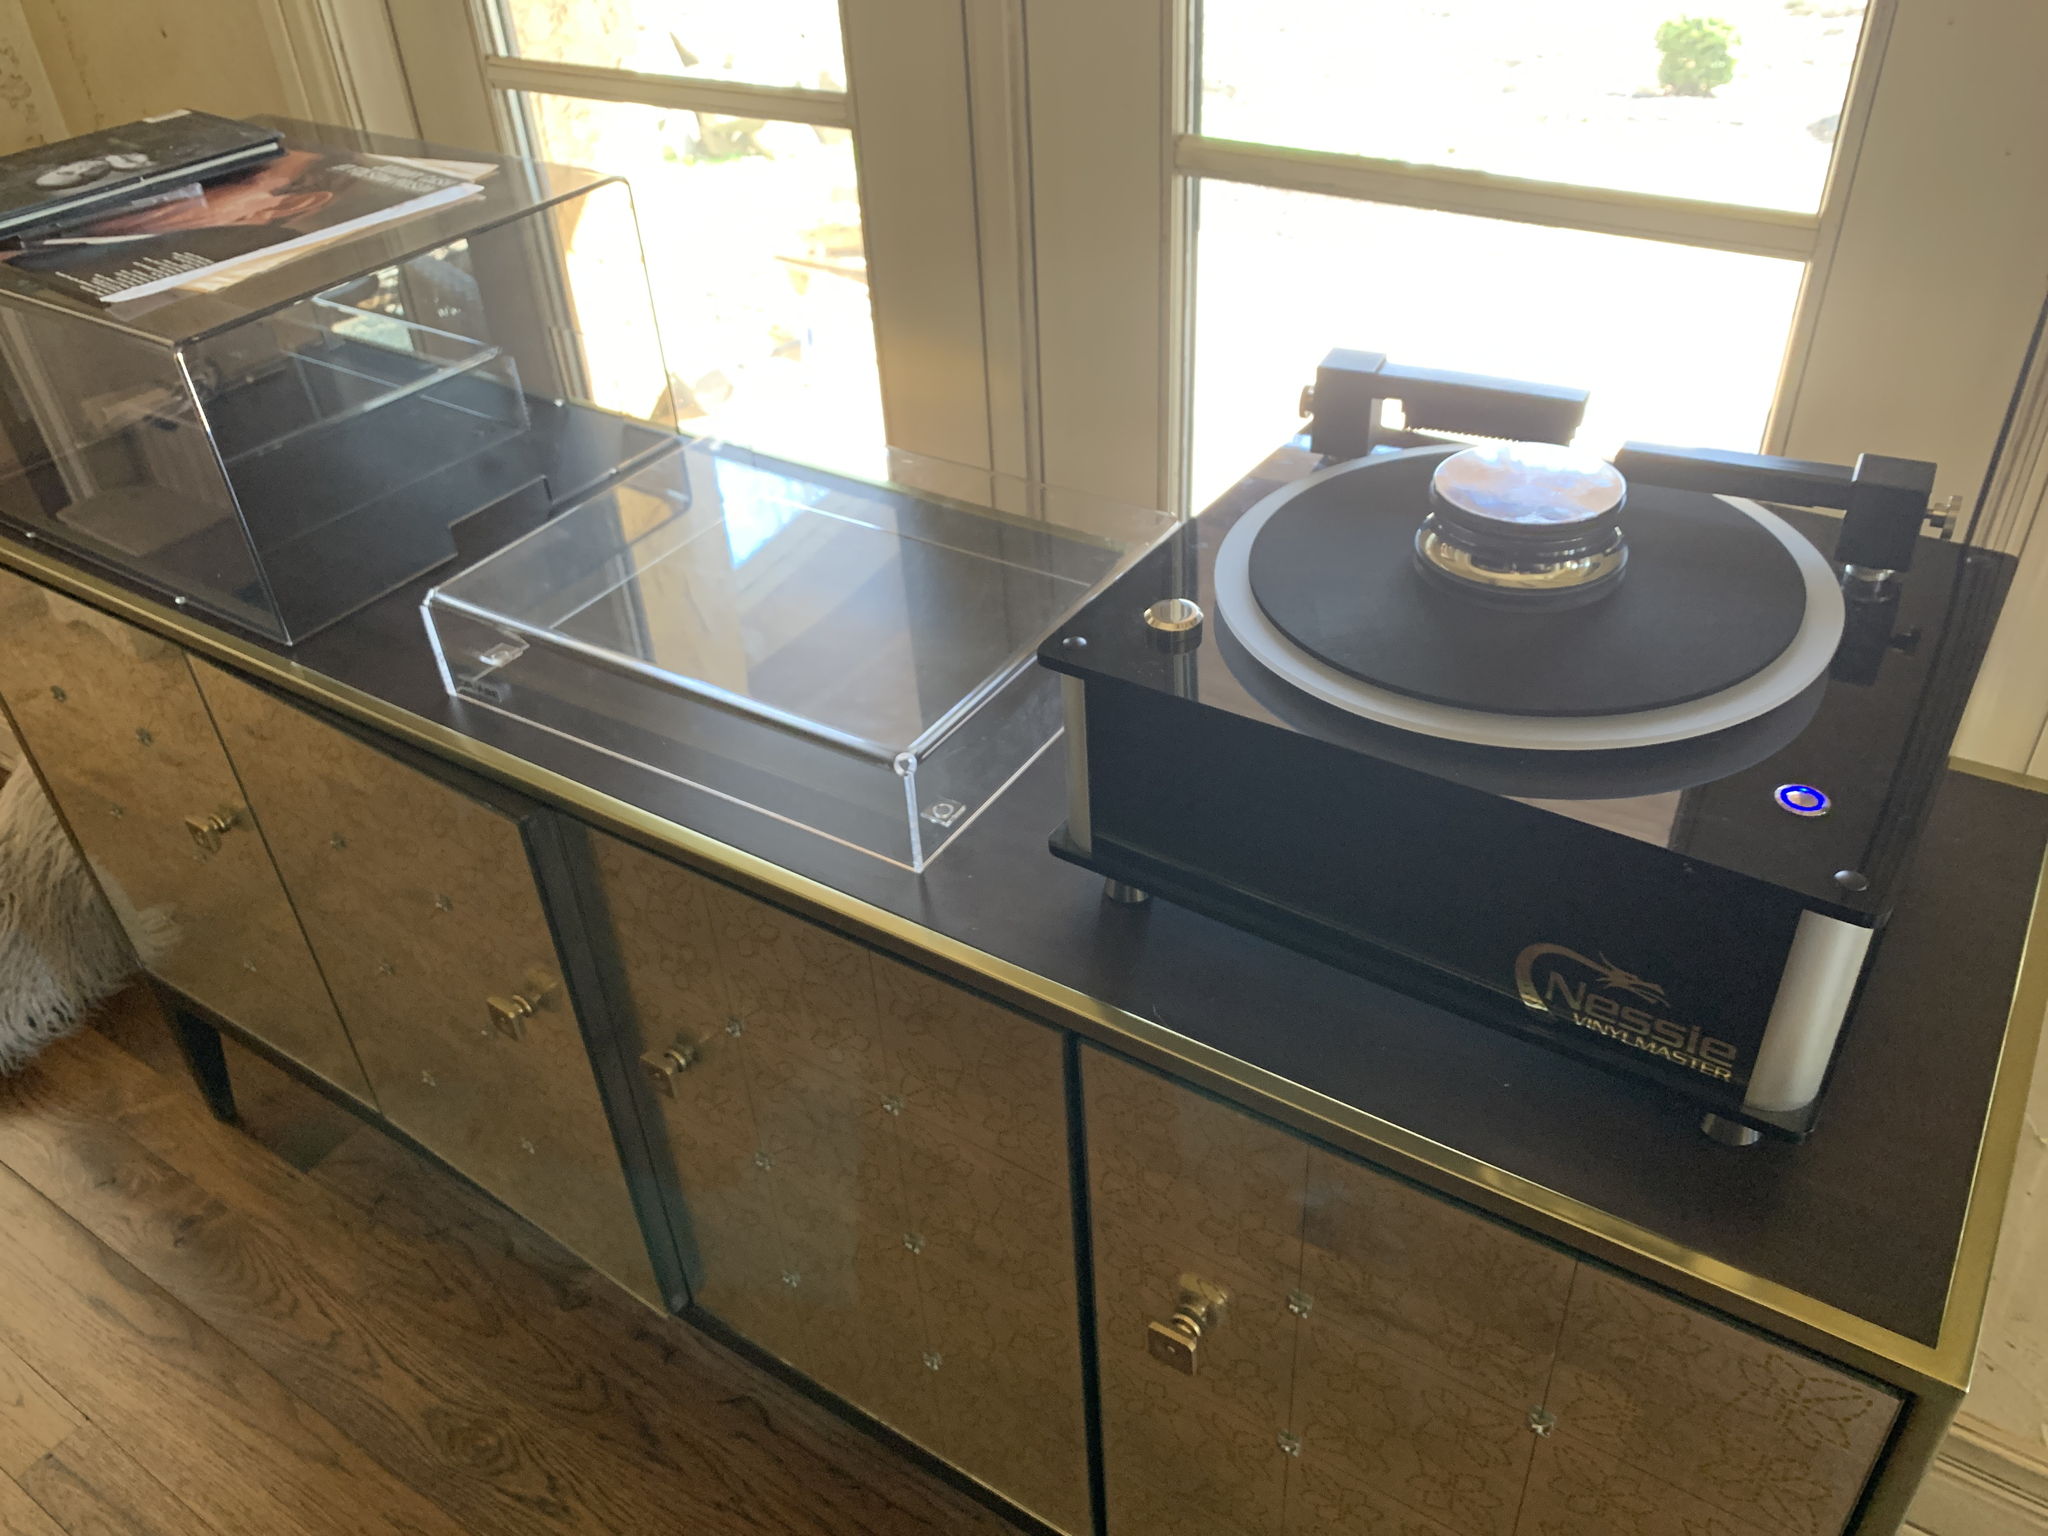 Analogue in a living room space : Newton’s system 